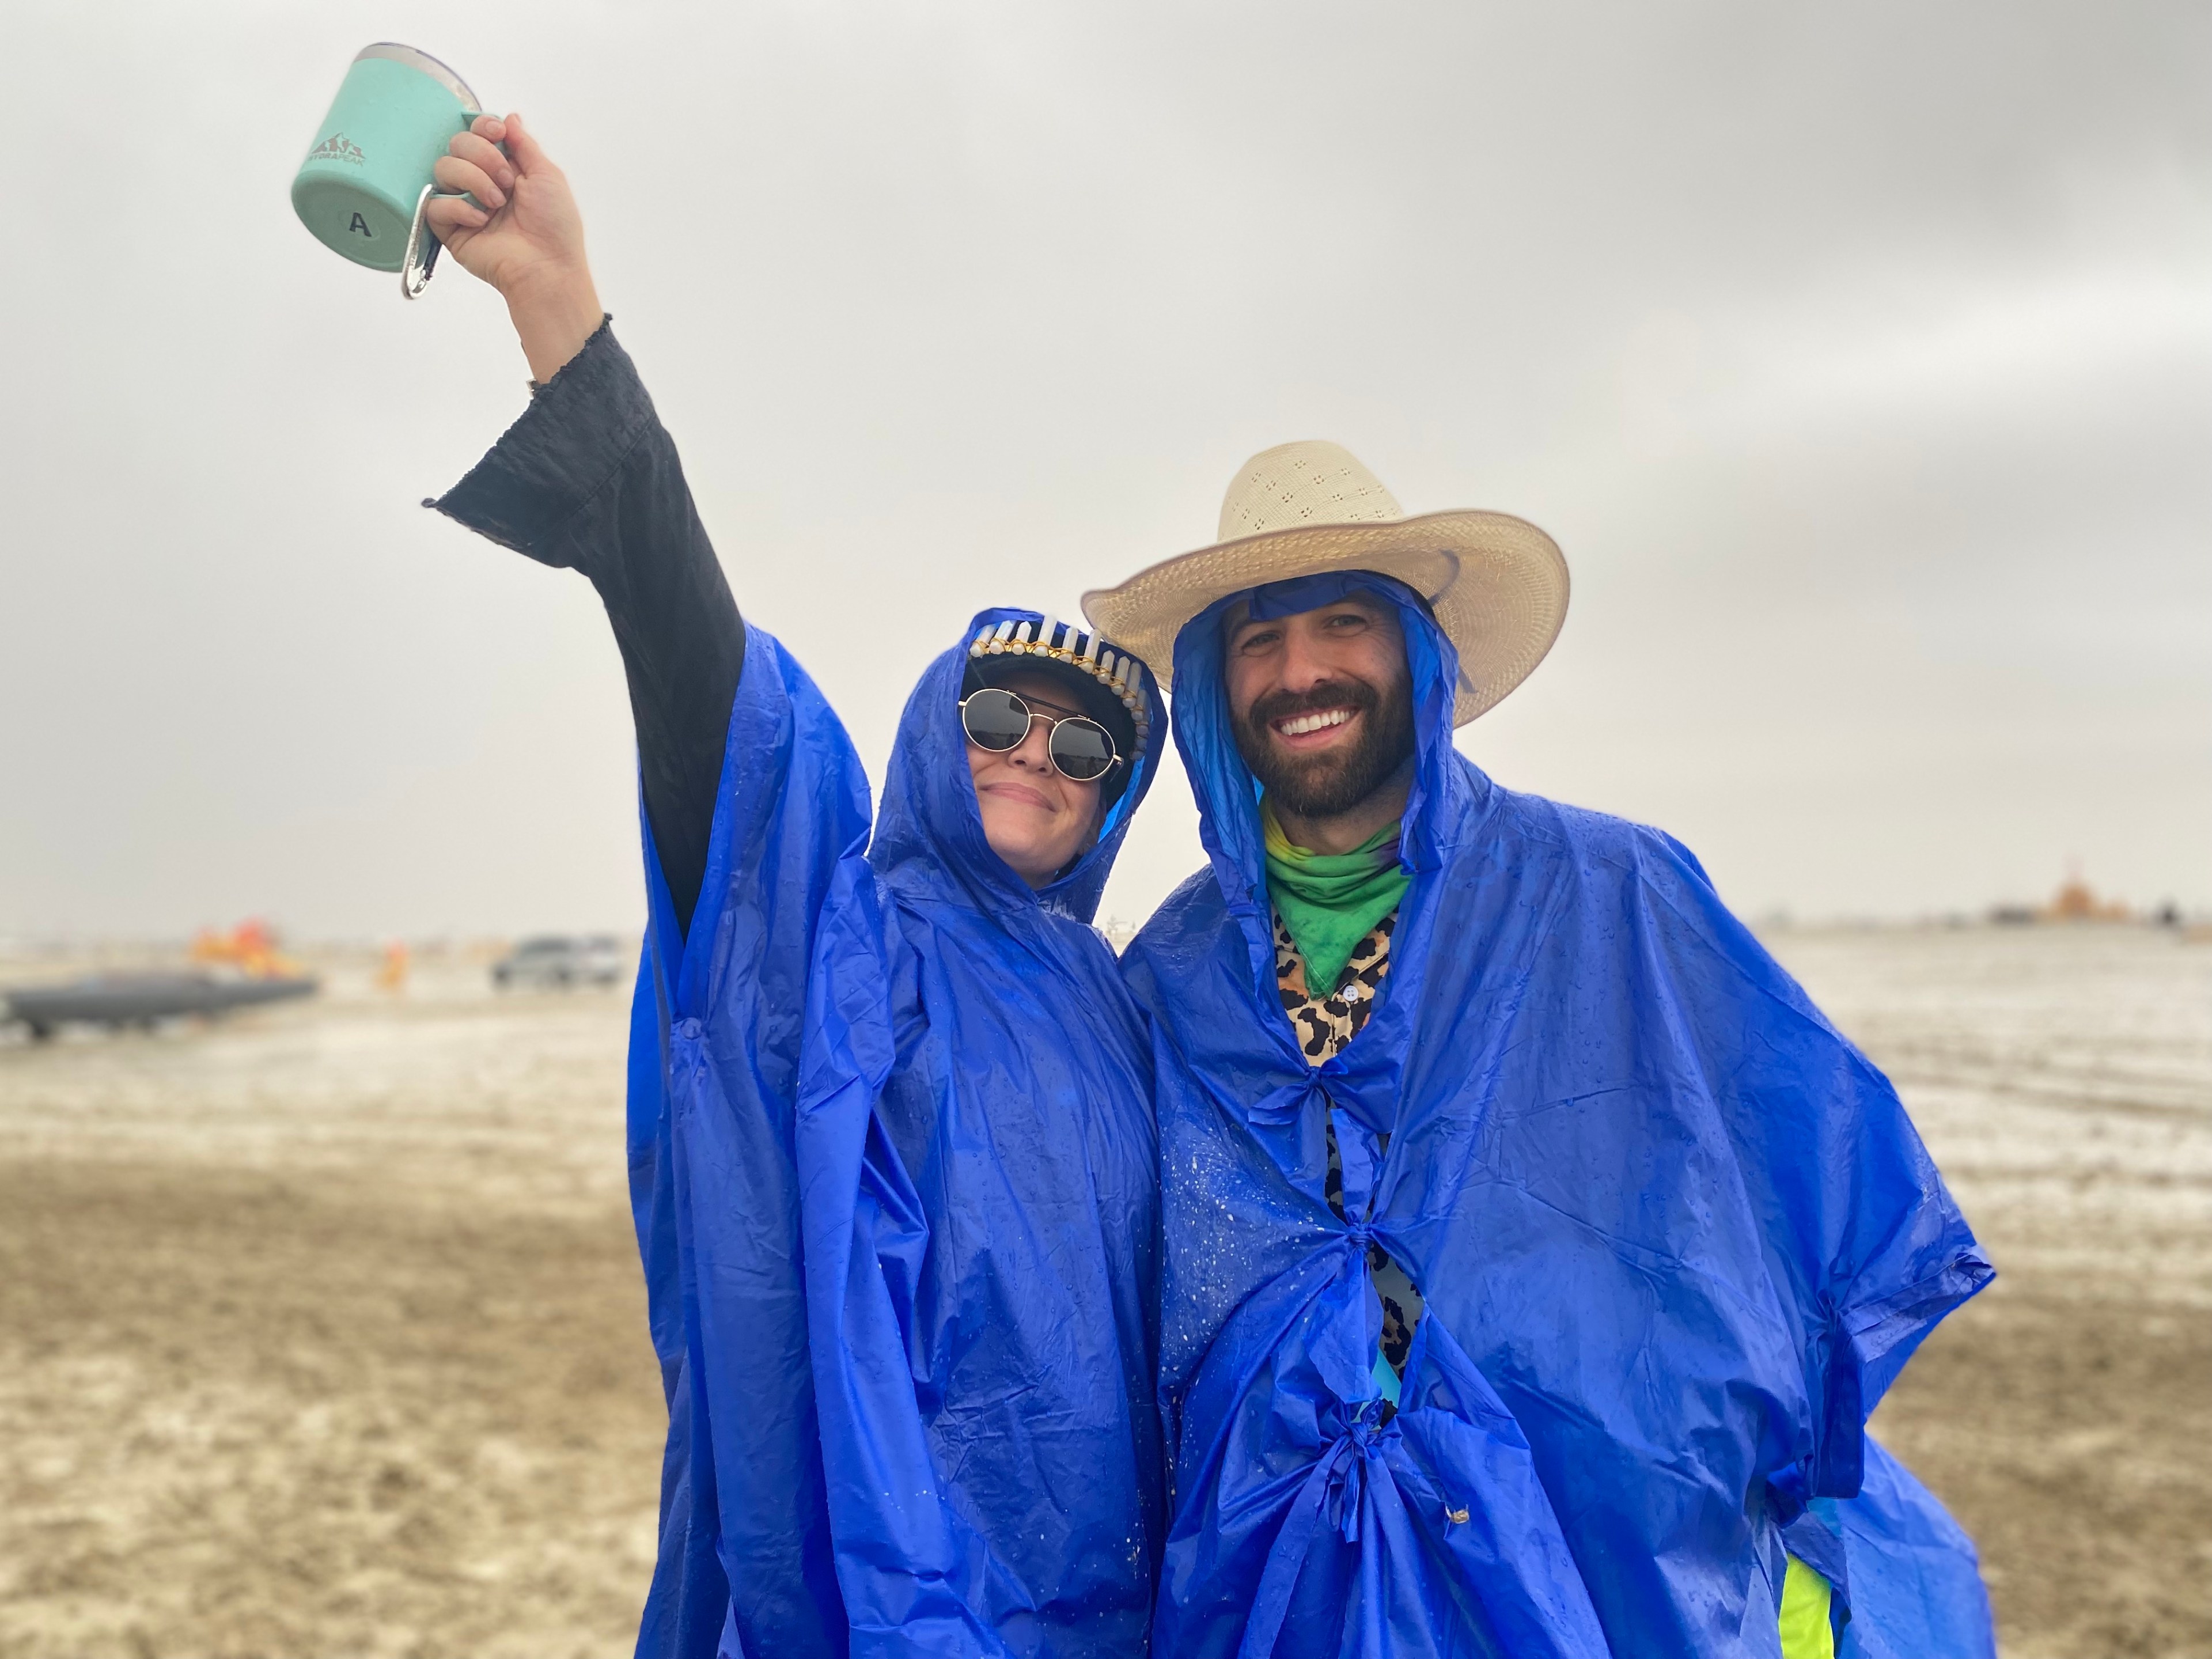 Two people in blue ponchos are smiling; one is raising a mug, the other wearing a straw hat.